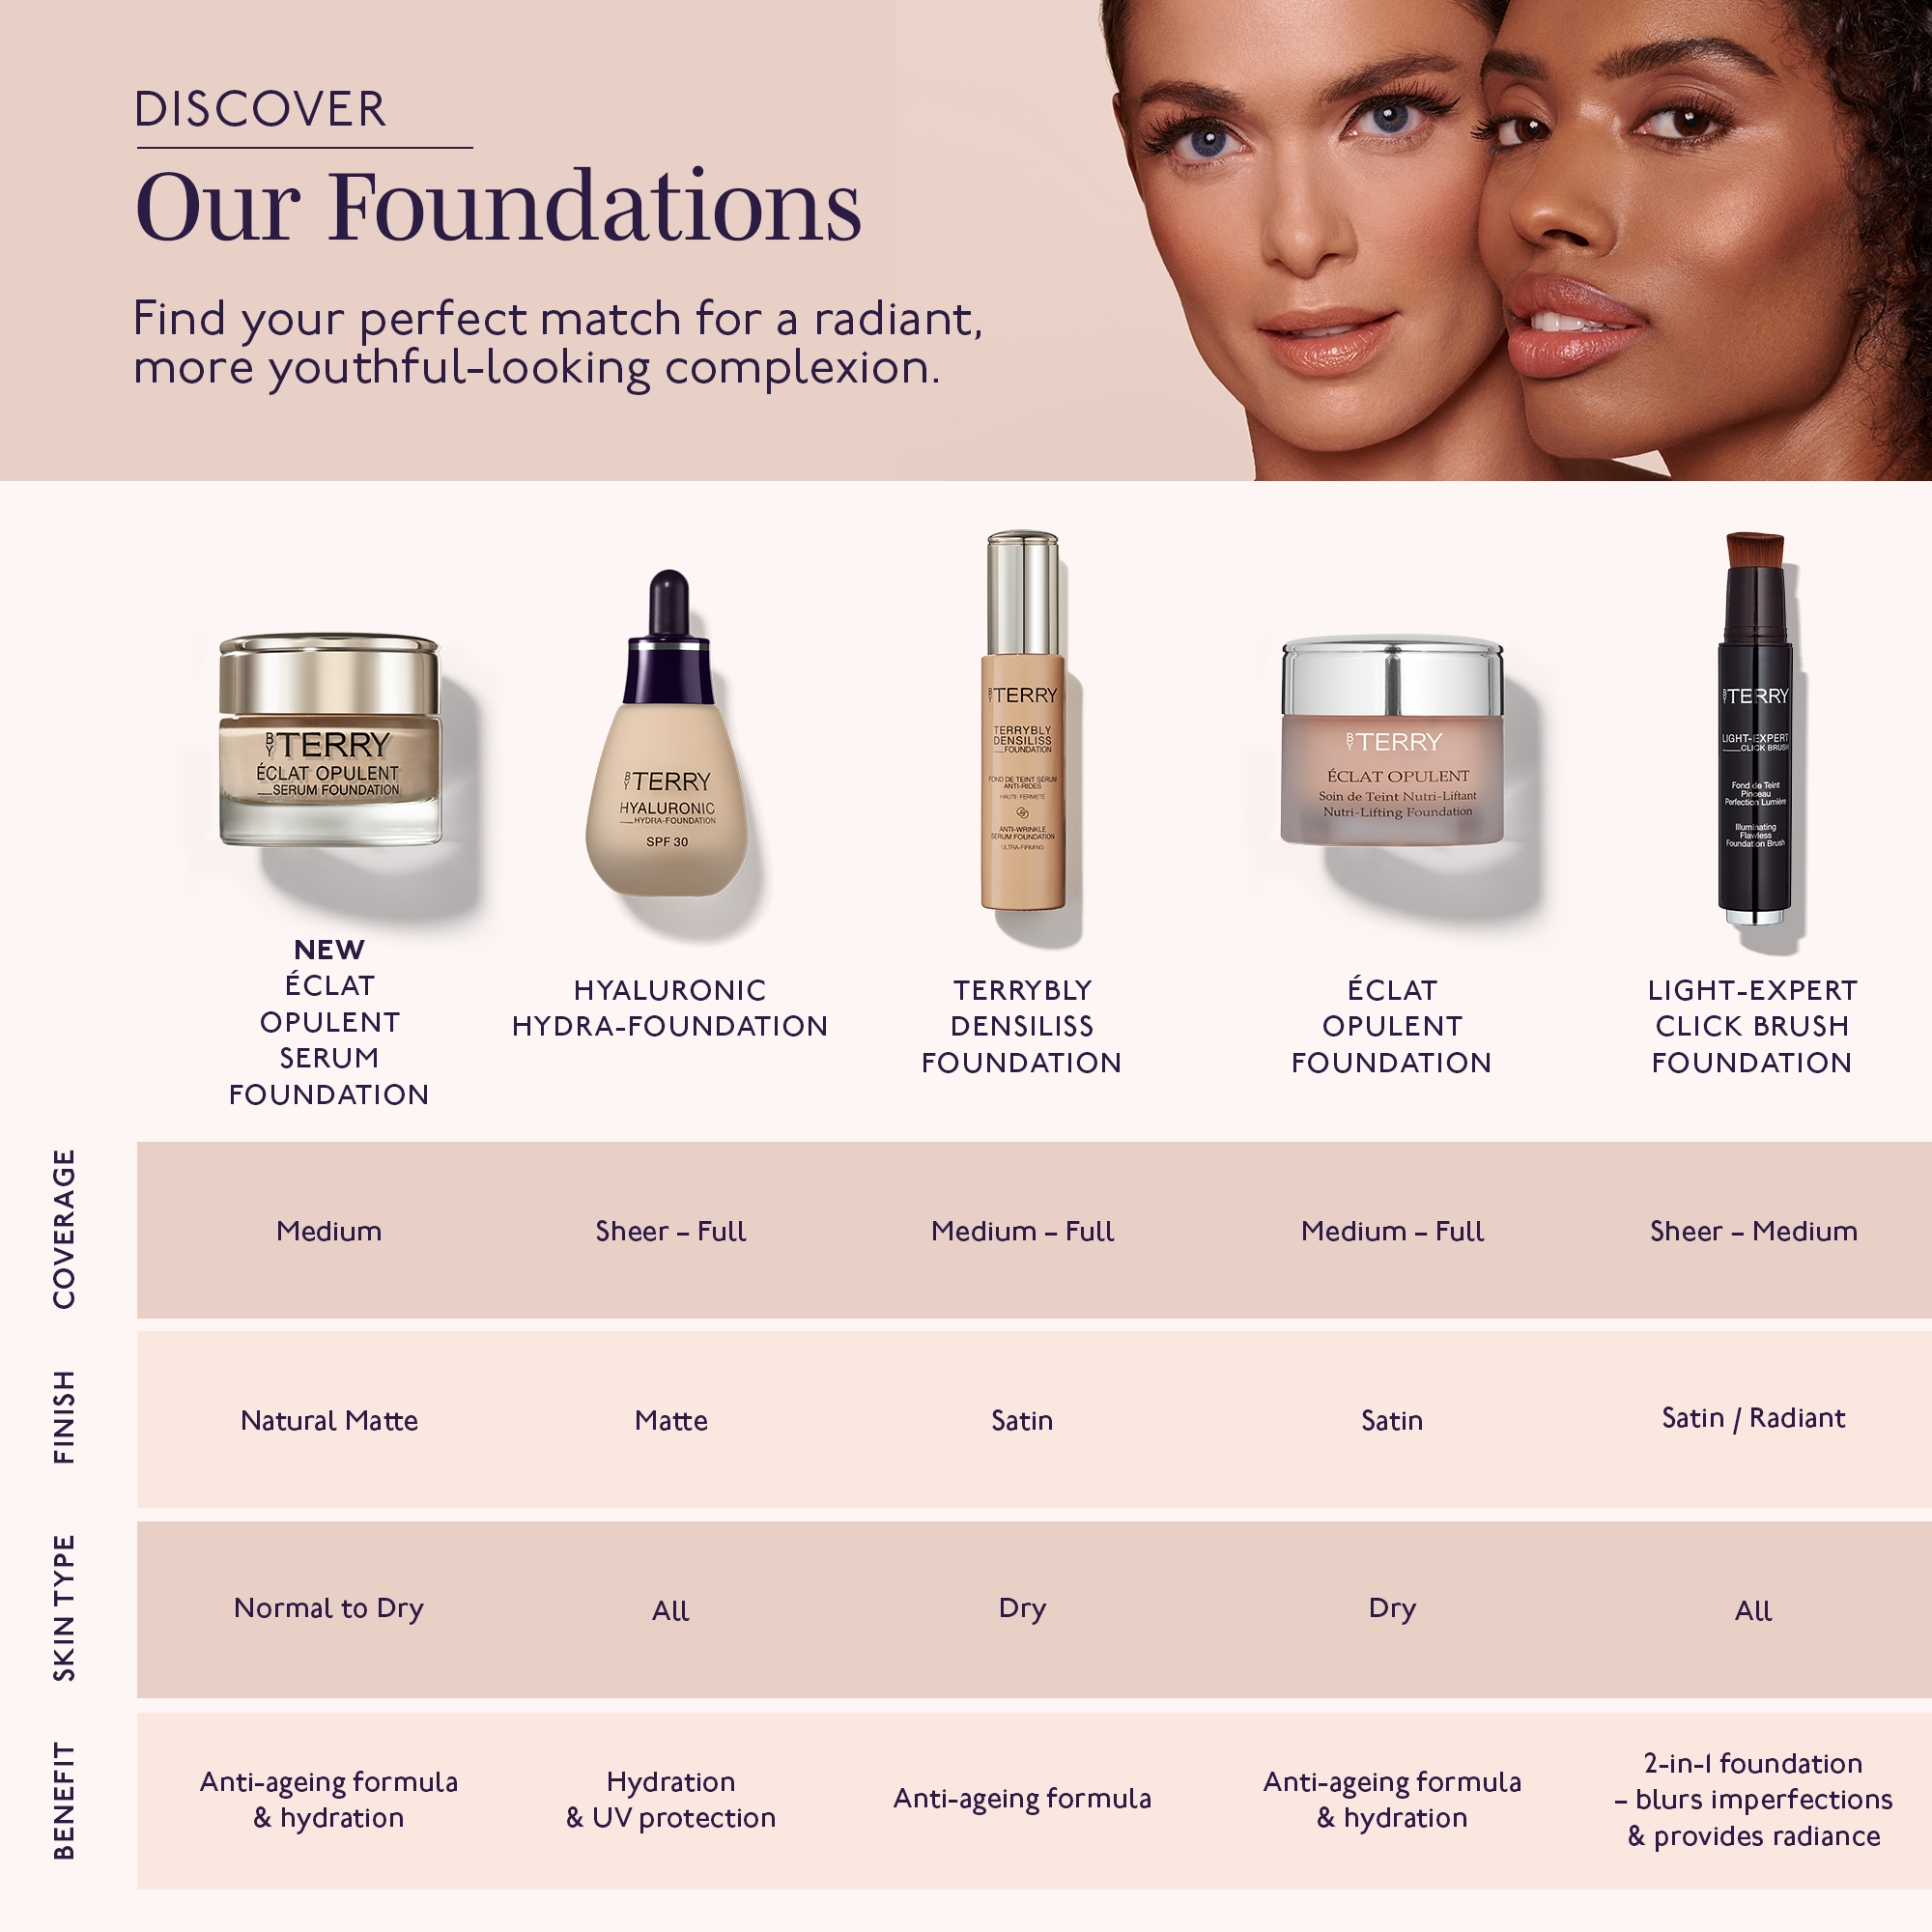 Discover our foundations find your perfect match for a radiant, more youthful-looking complextion. NEW ÉCLAT OPULENT
                          SERUM FOUNDATION
                          HYALURONIC HYDRA-FOUNDATION
                          TERRY BLY DENSILISS FOUNDATION
                          ÉCLAT OPULENT FOUNDATION. COVERAGE
                          Medium, Sheer – Full, Medium - Full, Medium - Full, Sheer – Medium.
                          FINISH
                          Natural Matte, Matte, Satin, Satin, Satin / Radiant.
                          SKIN TYPE
                          ,Normal to Dry, ALL, Dry, Dry, Dry, All
                          BENEFIT
                          Anti-ageing formula
                          & hydration
                          Hydration & UV protection
                          Anti-ageing formula
                          ng formula
                          Anti-ageing formula
                          & hydration
                          2-in-1 foundation - blurs imperfections & provides radiance